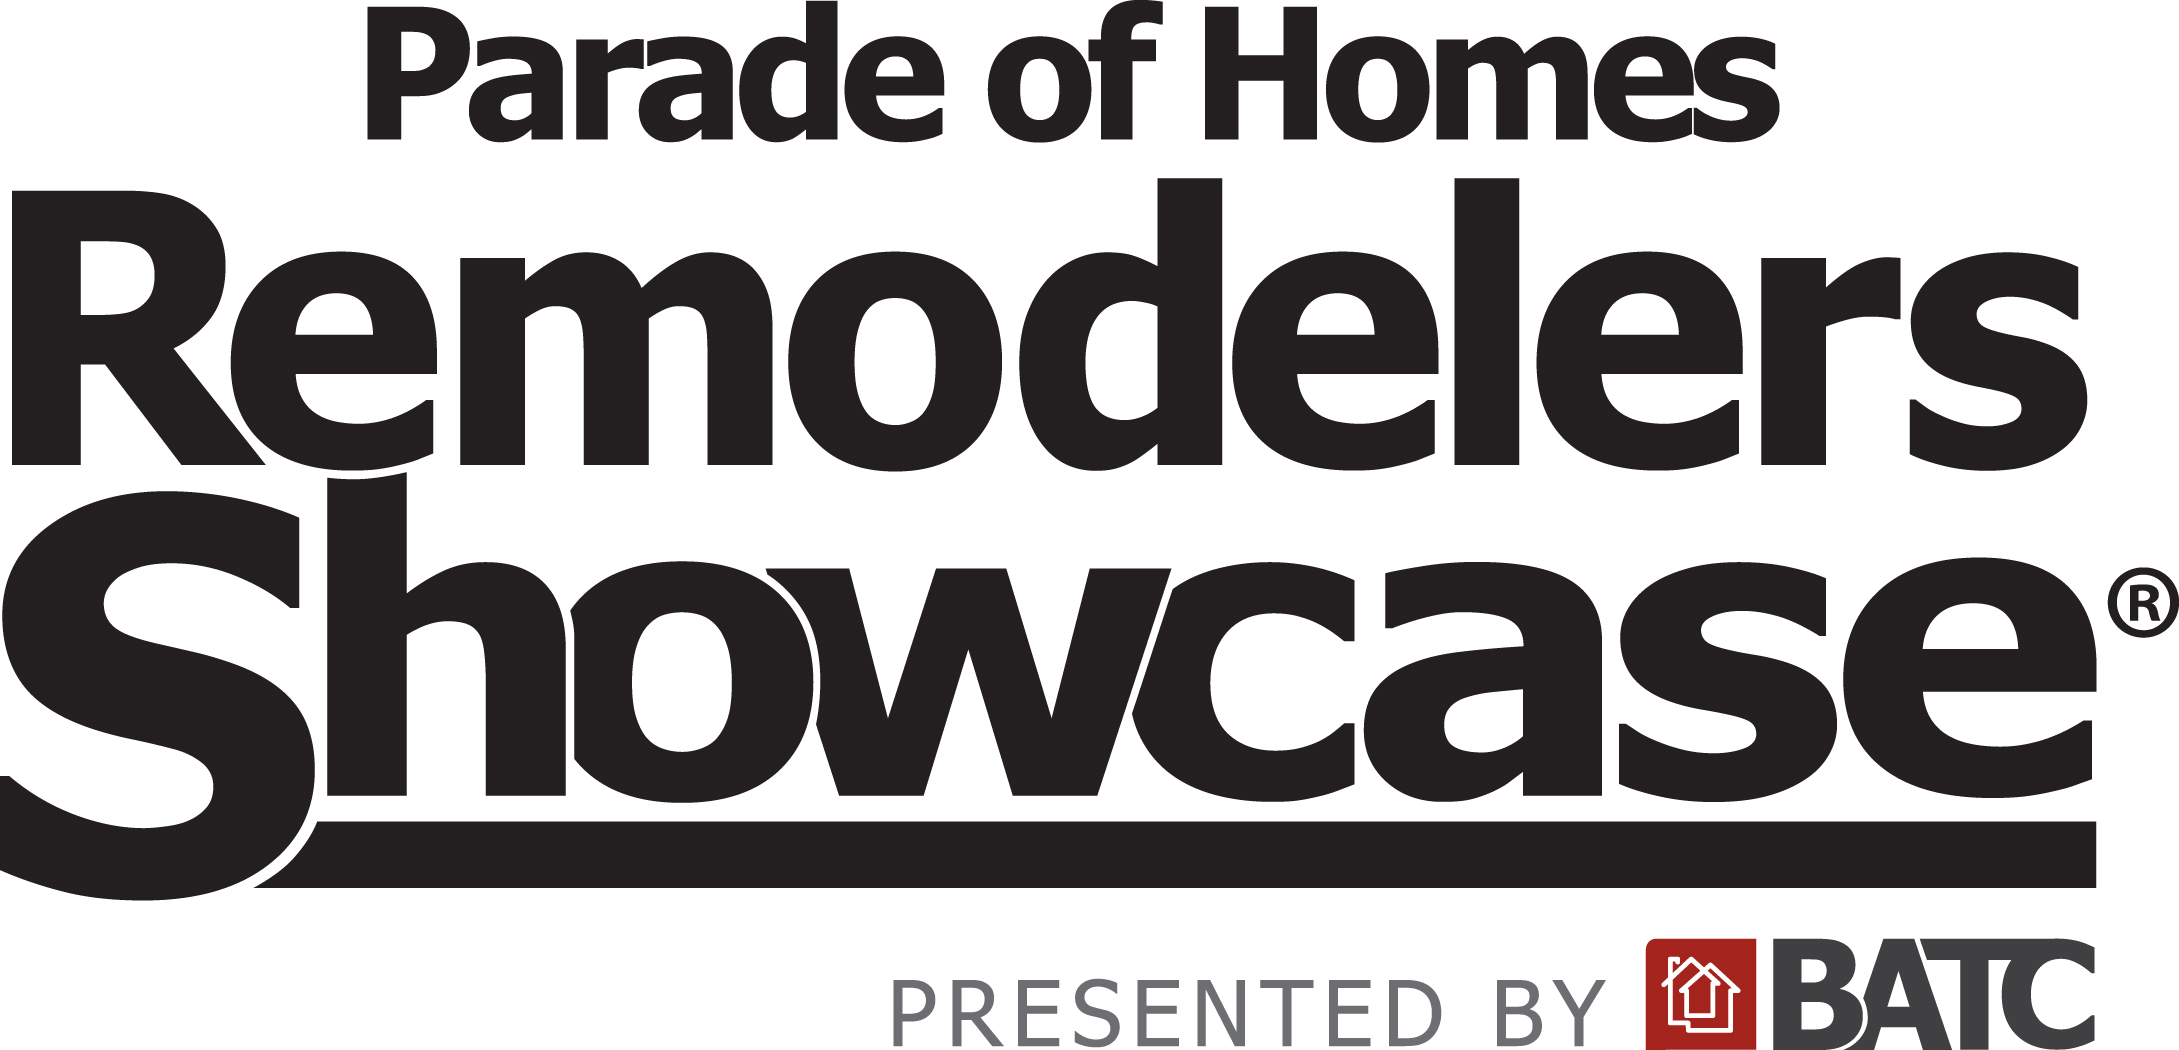 Image for Facts About the Fall 2016 Parade of Homes Remodelers Showcase®